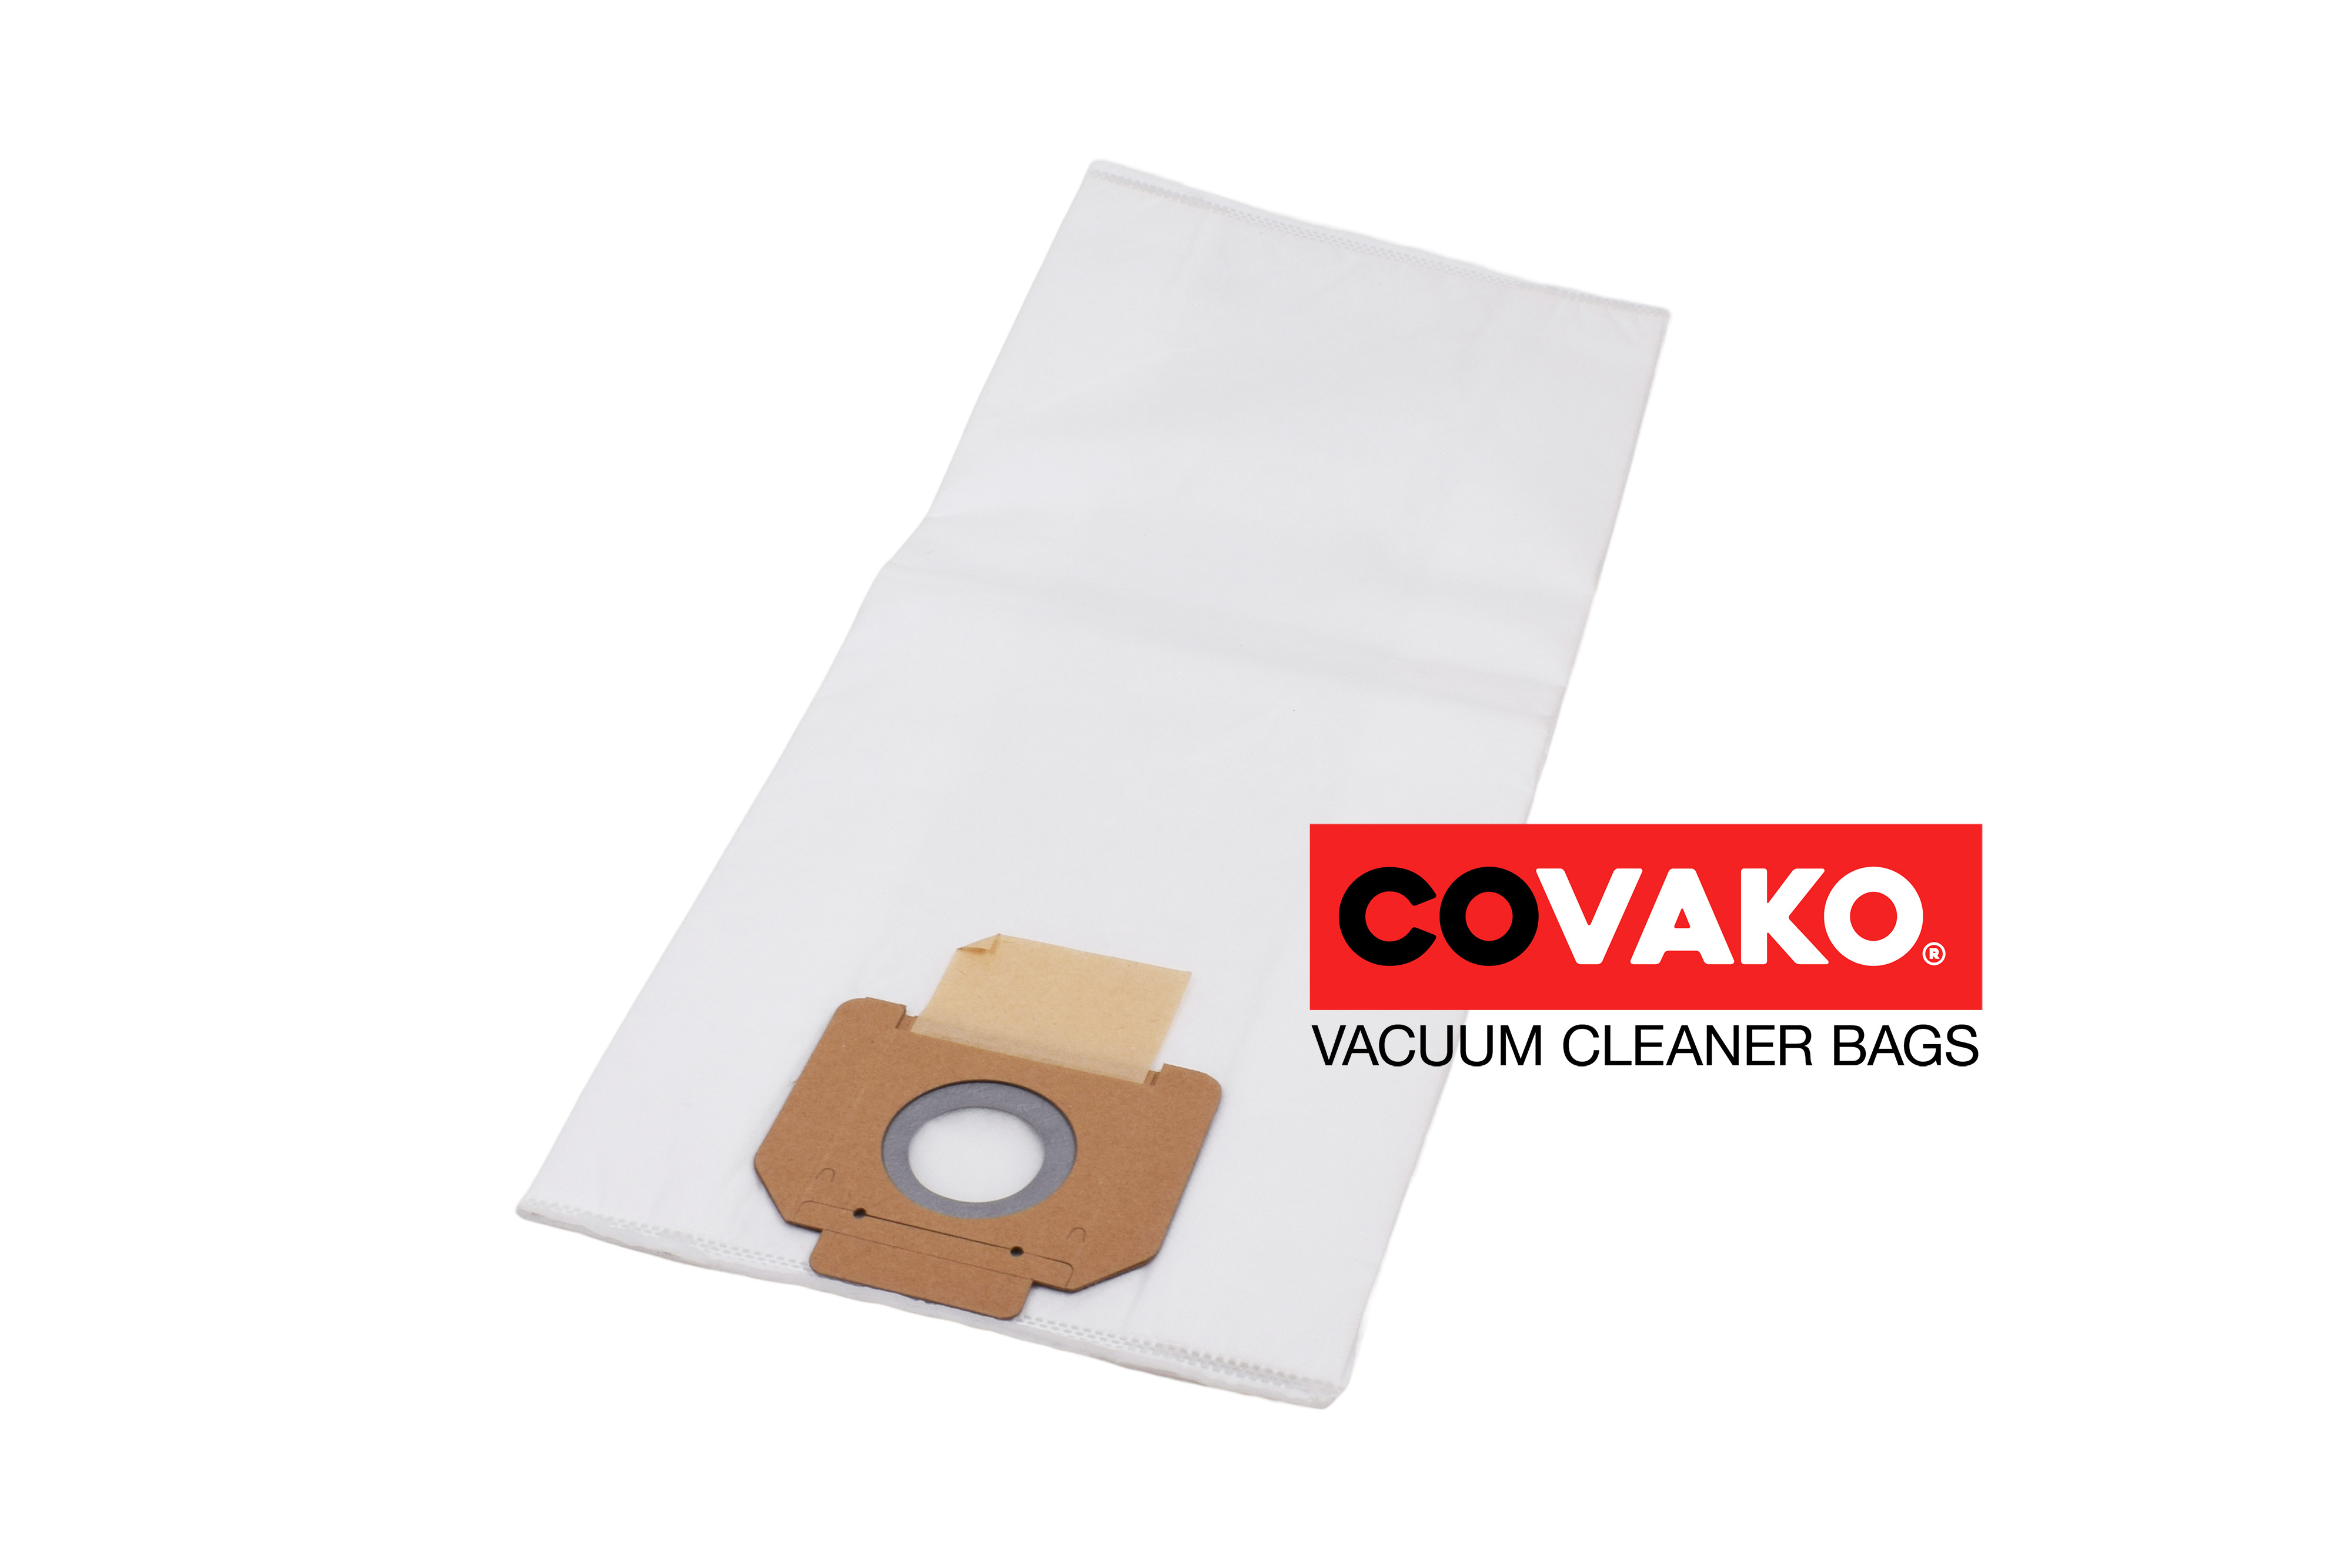 Gansow YS 2400/45 / Synthesis - Gansow vacuum cleaner bags